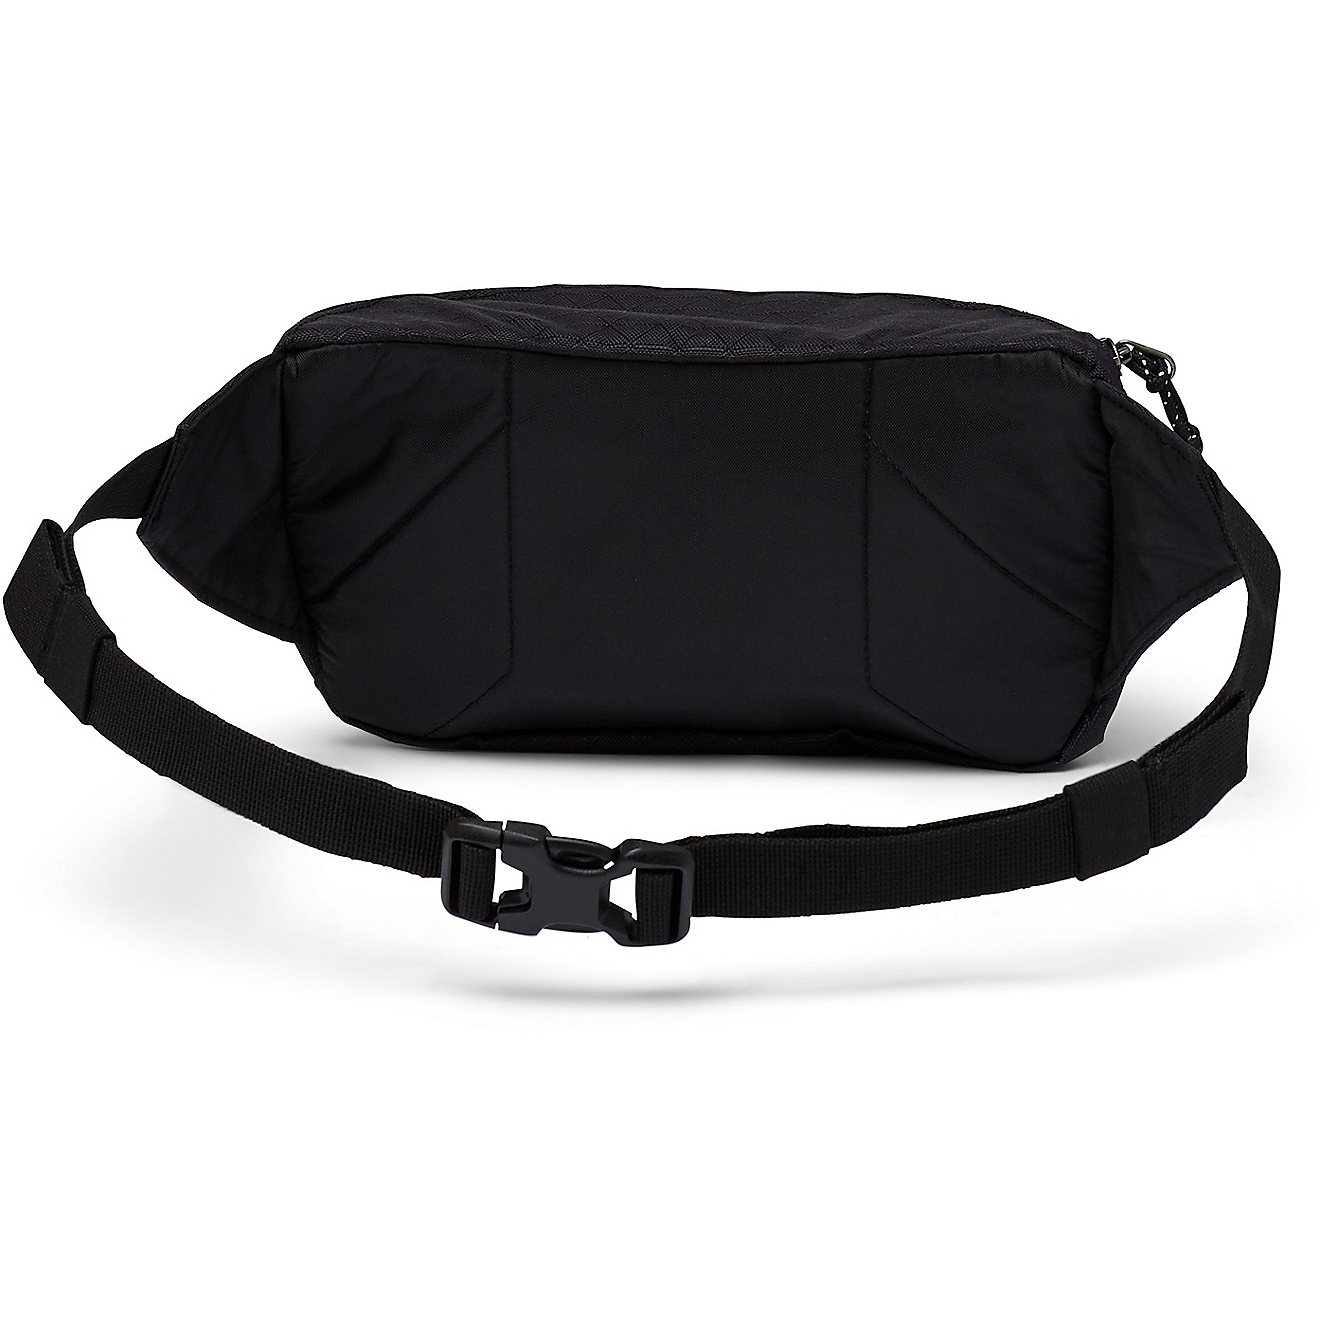 Columbia Sportswear Zigzag 1L Hip Pack | Free Shipping at Academy